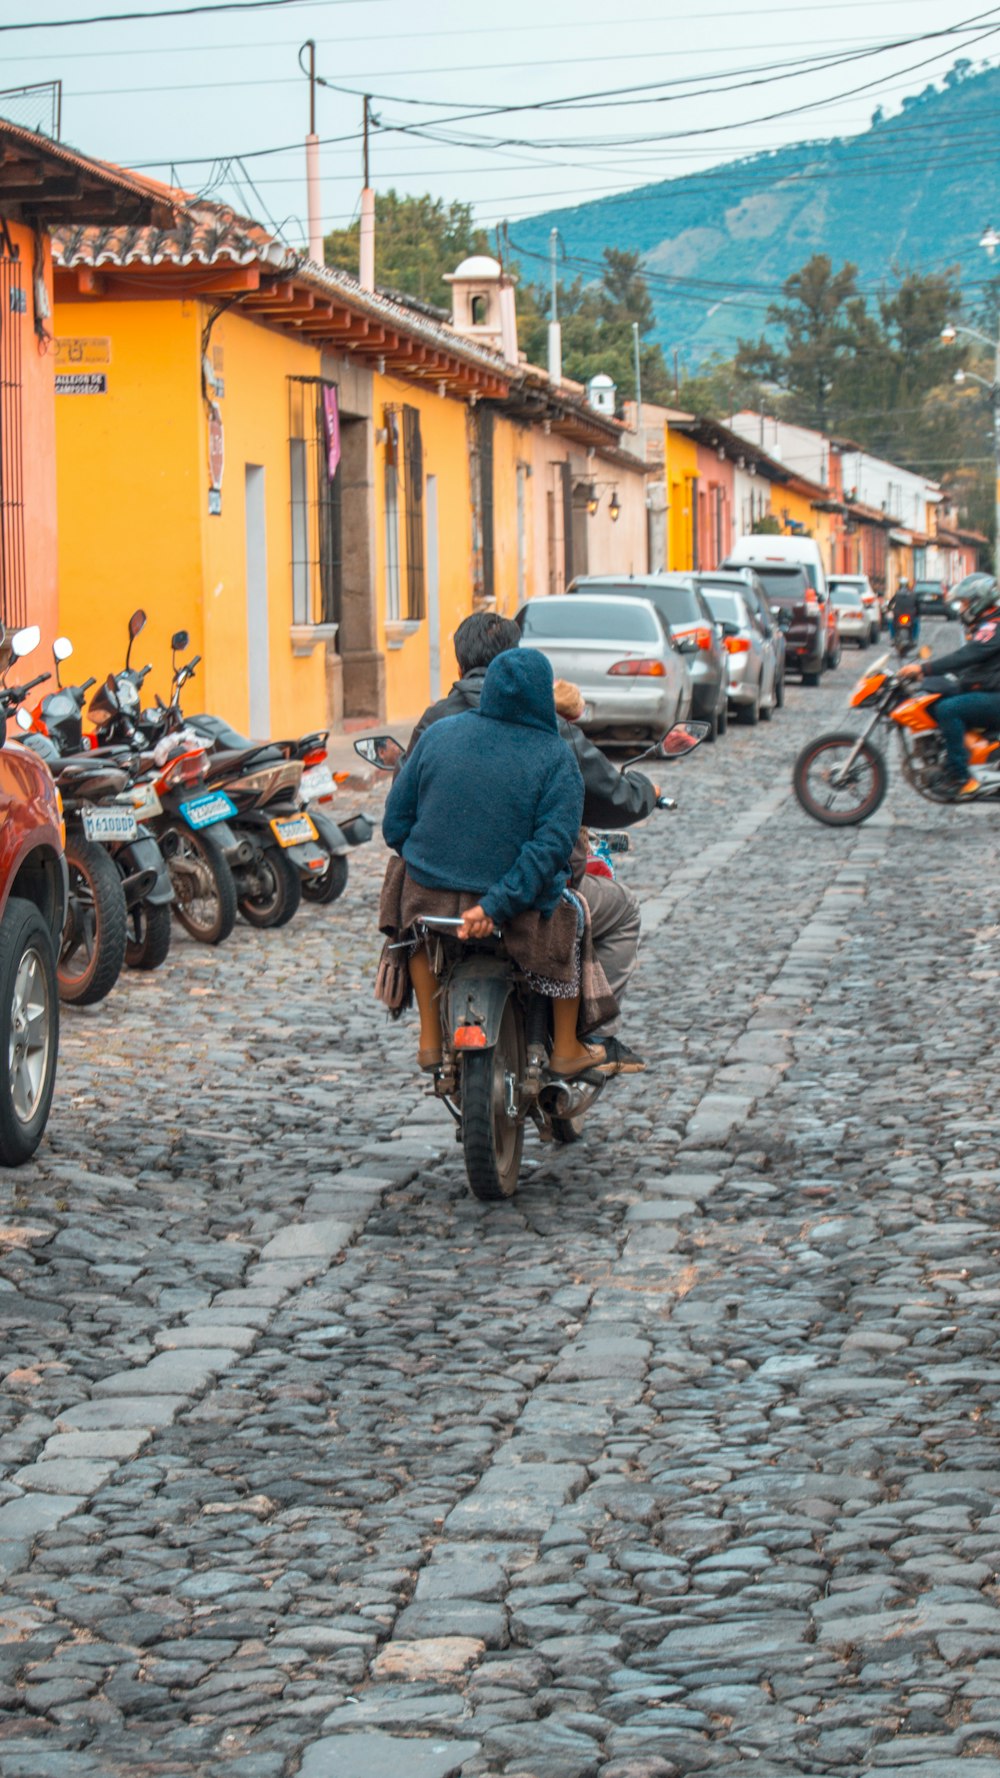 a person riding a motorcycle down a cobblestone street